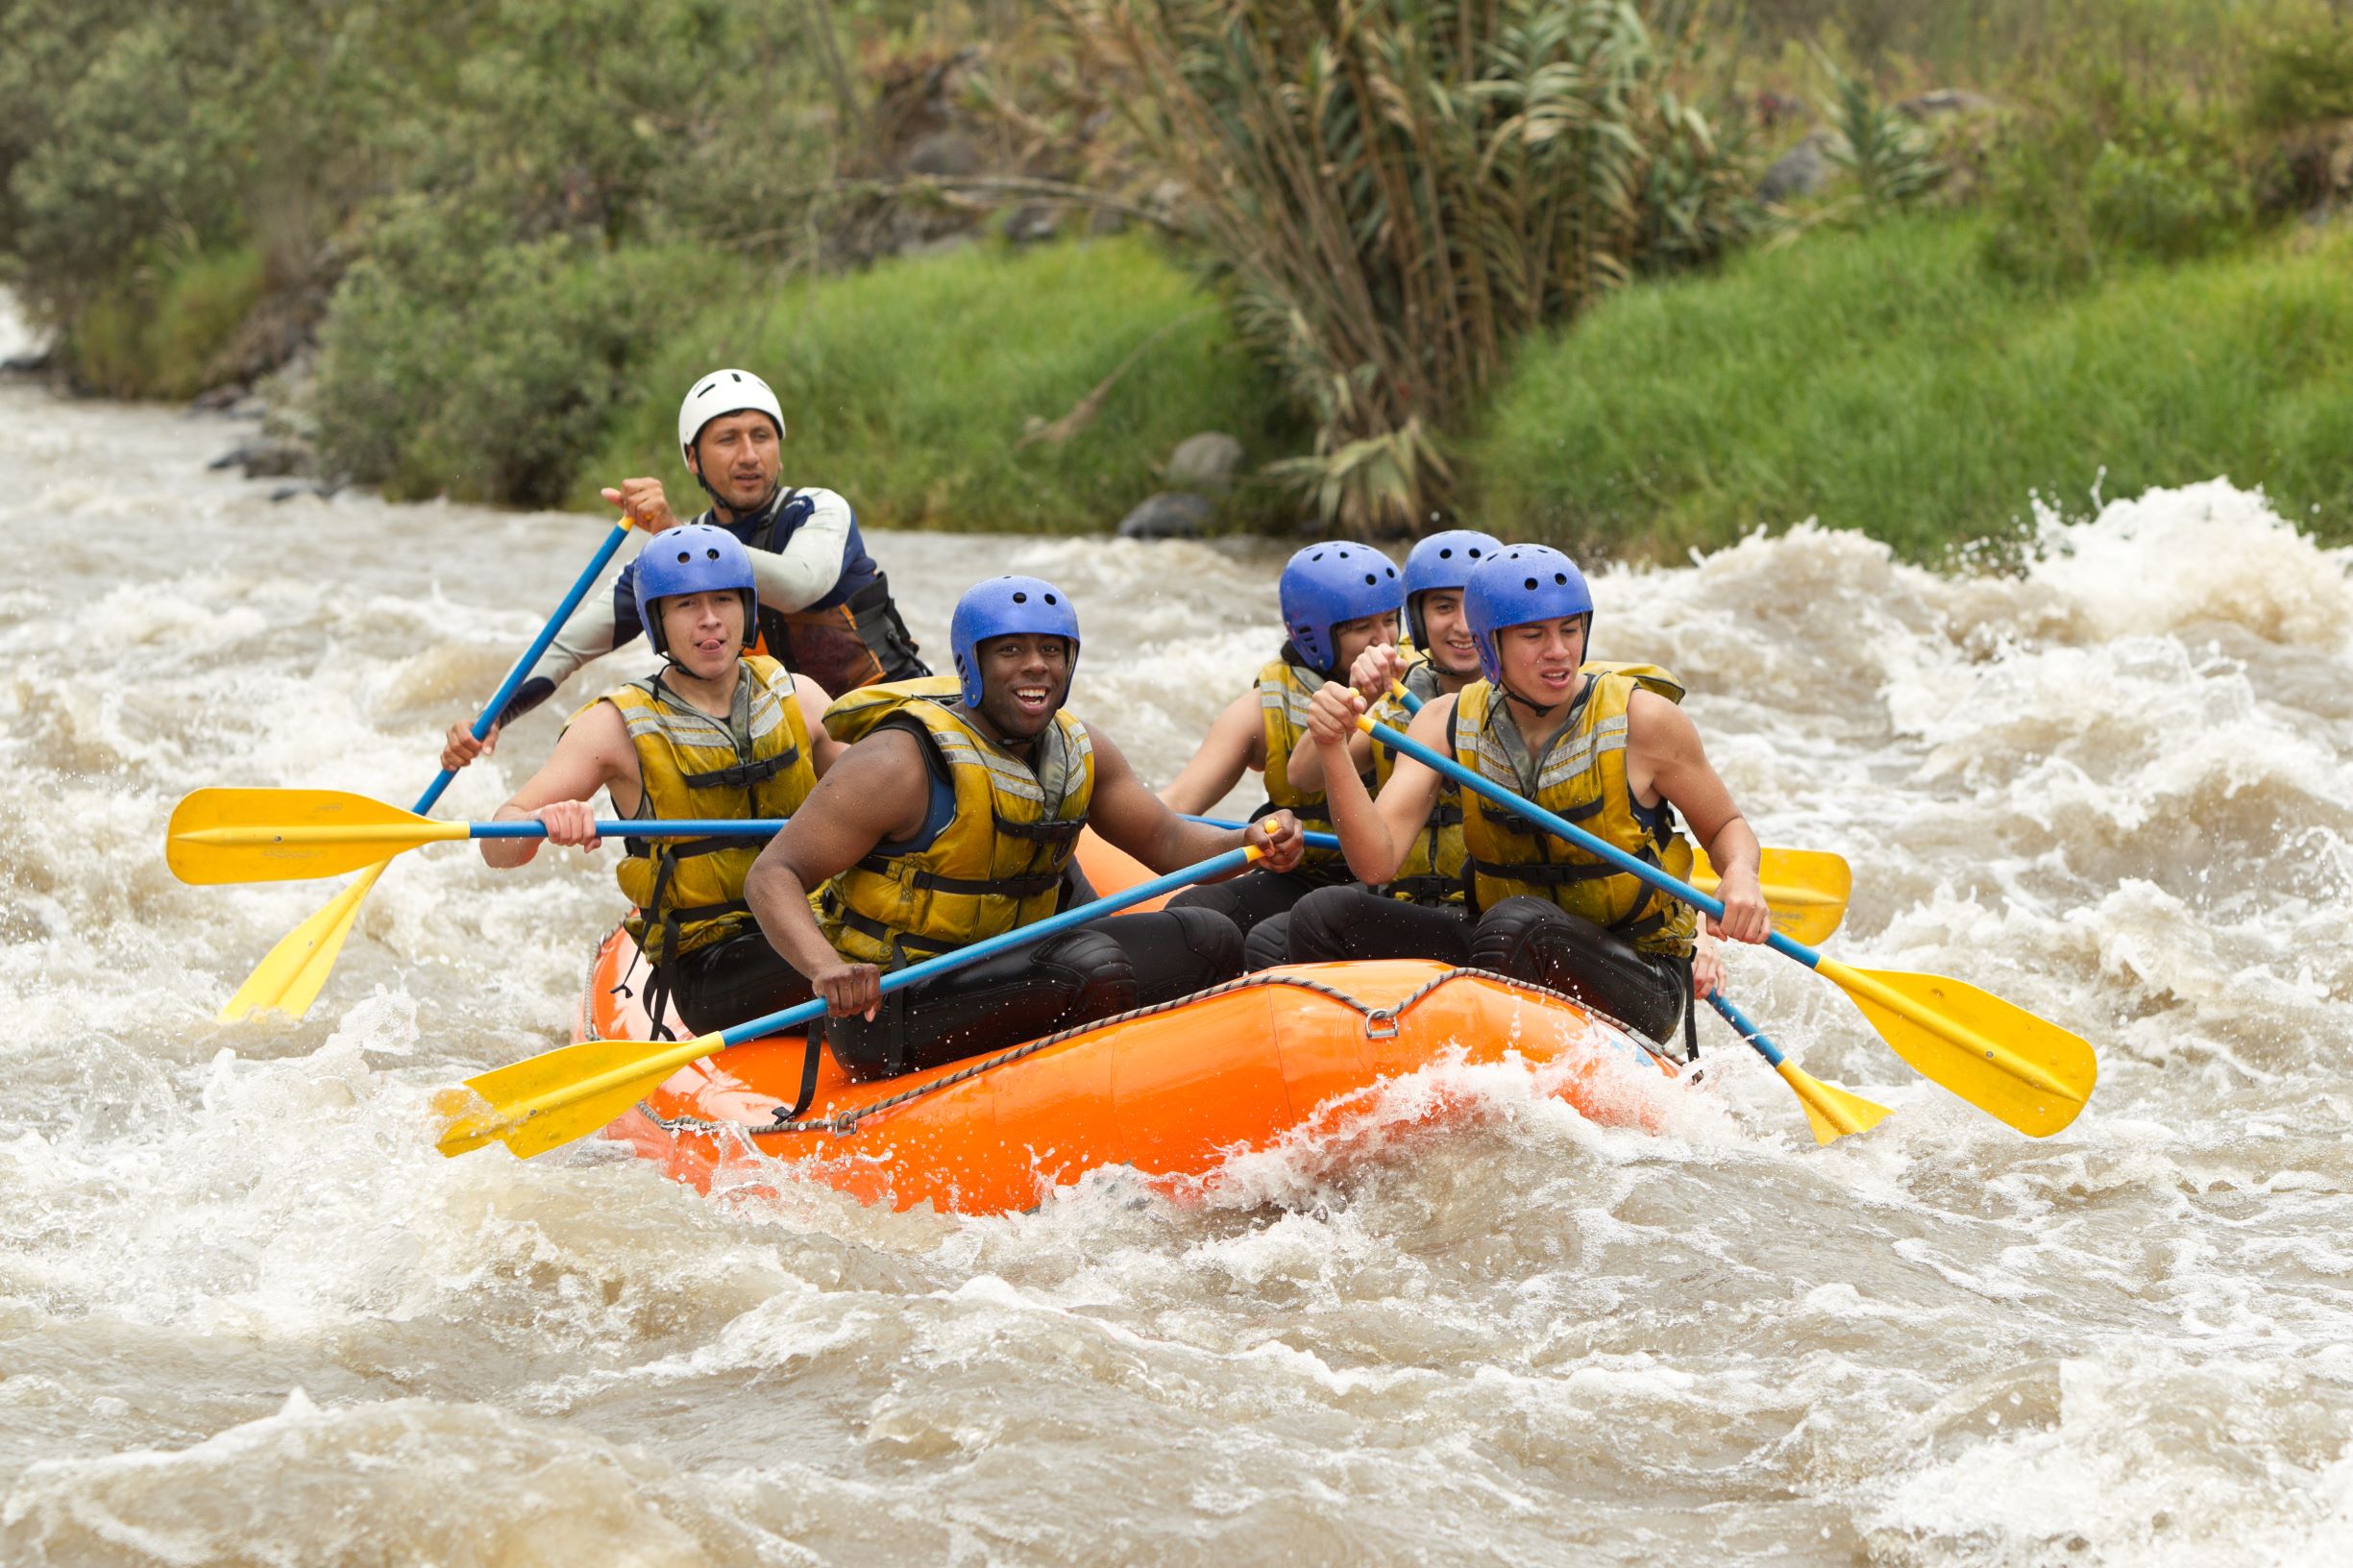 A jubilant group of young adults make their way down a seemingly treacherous river.